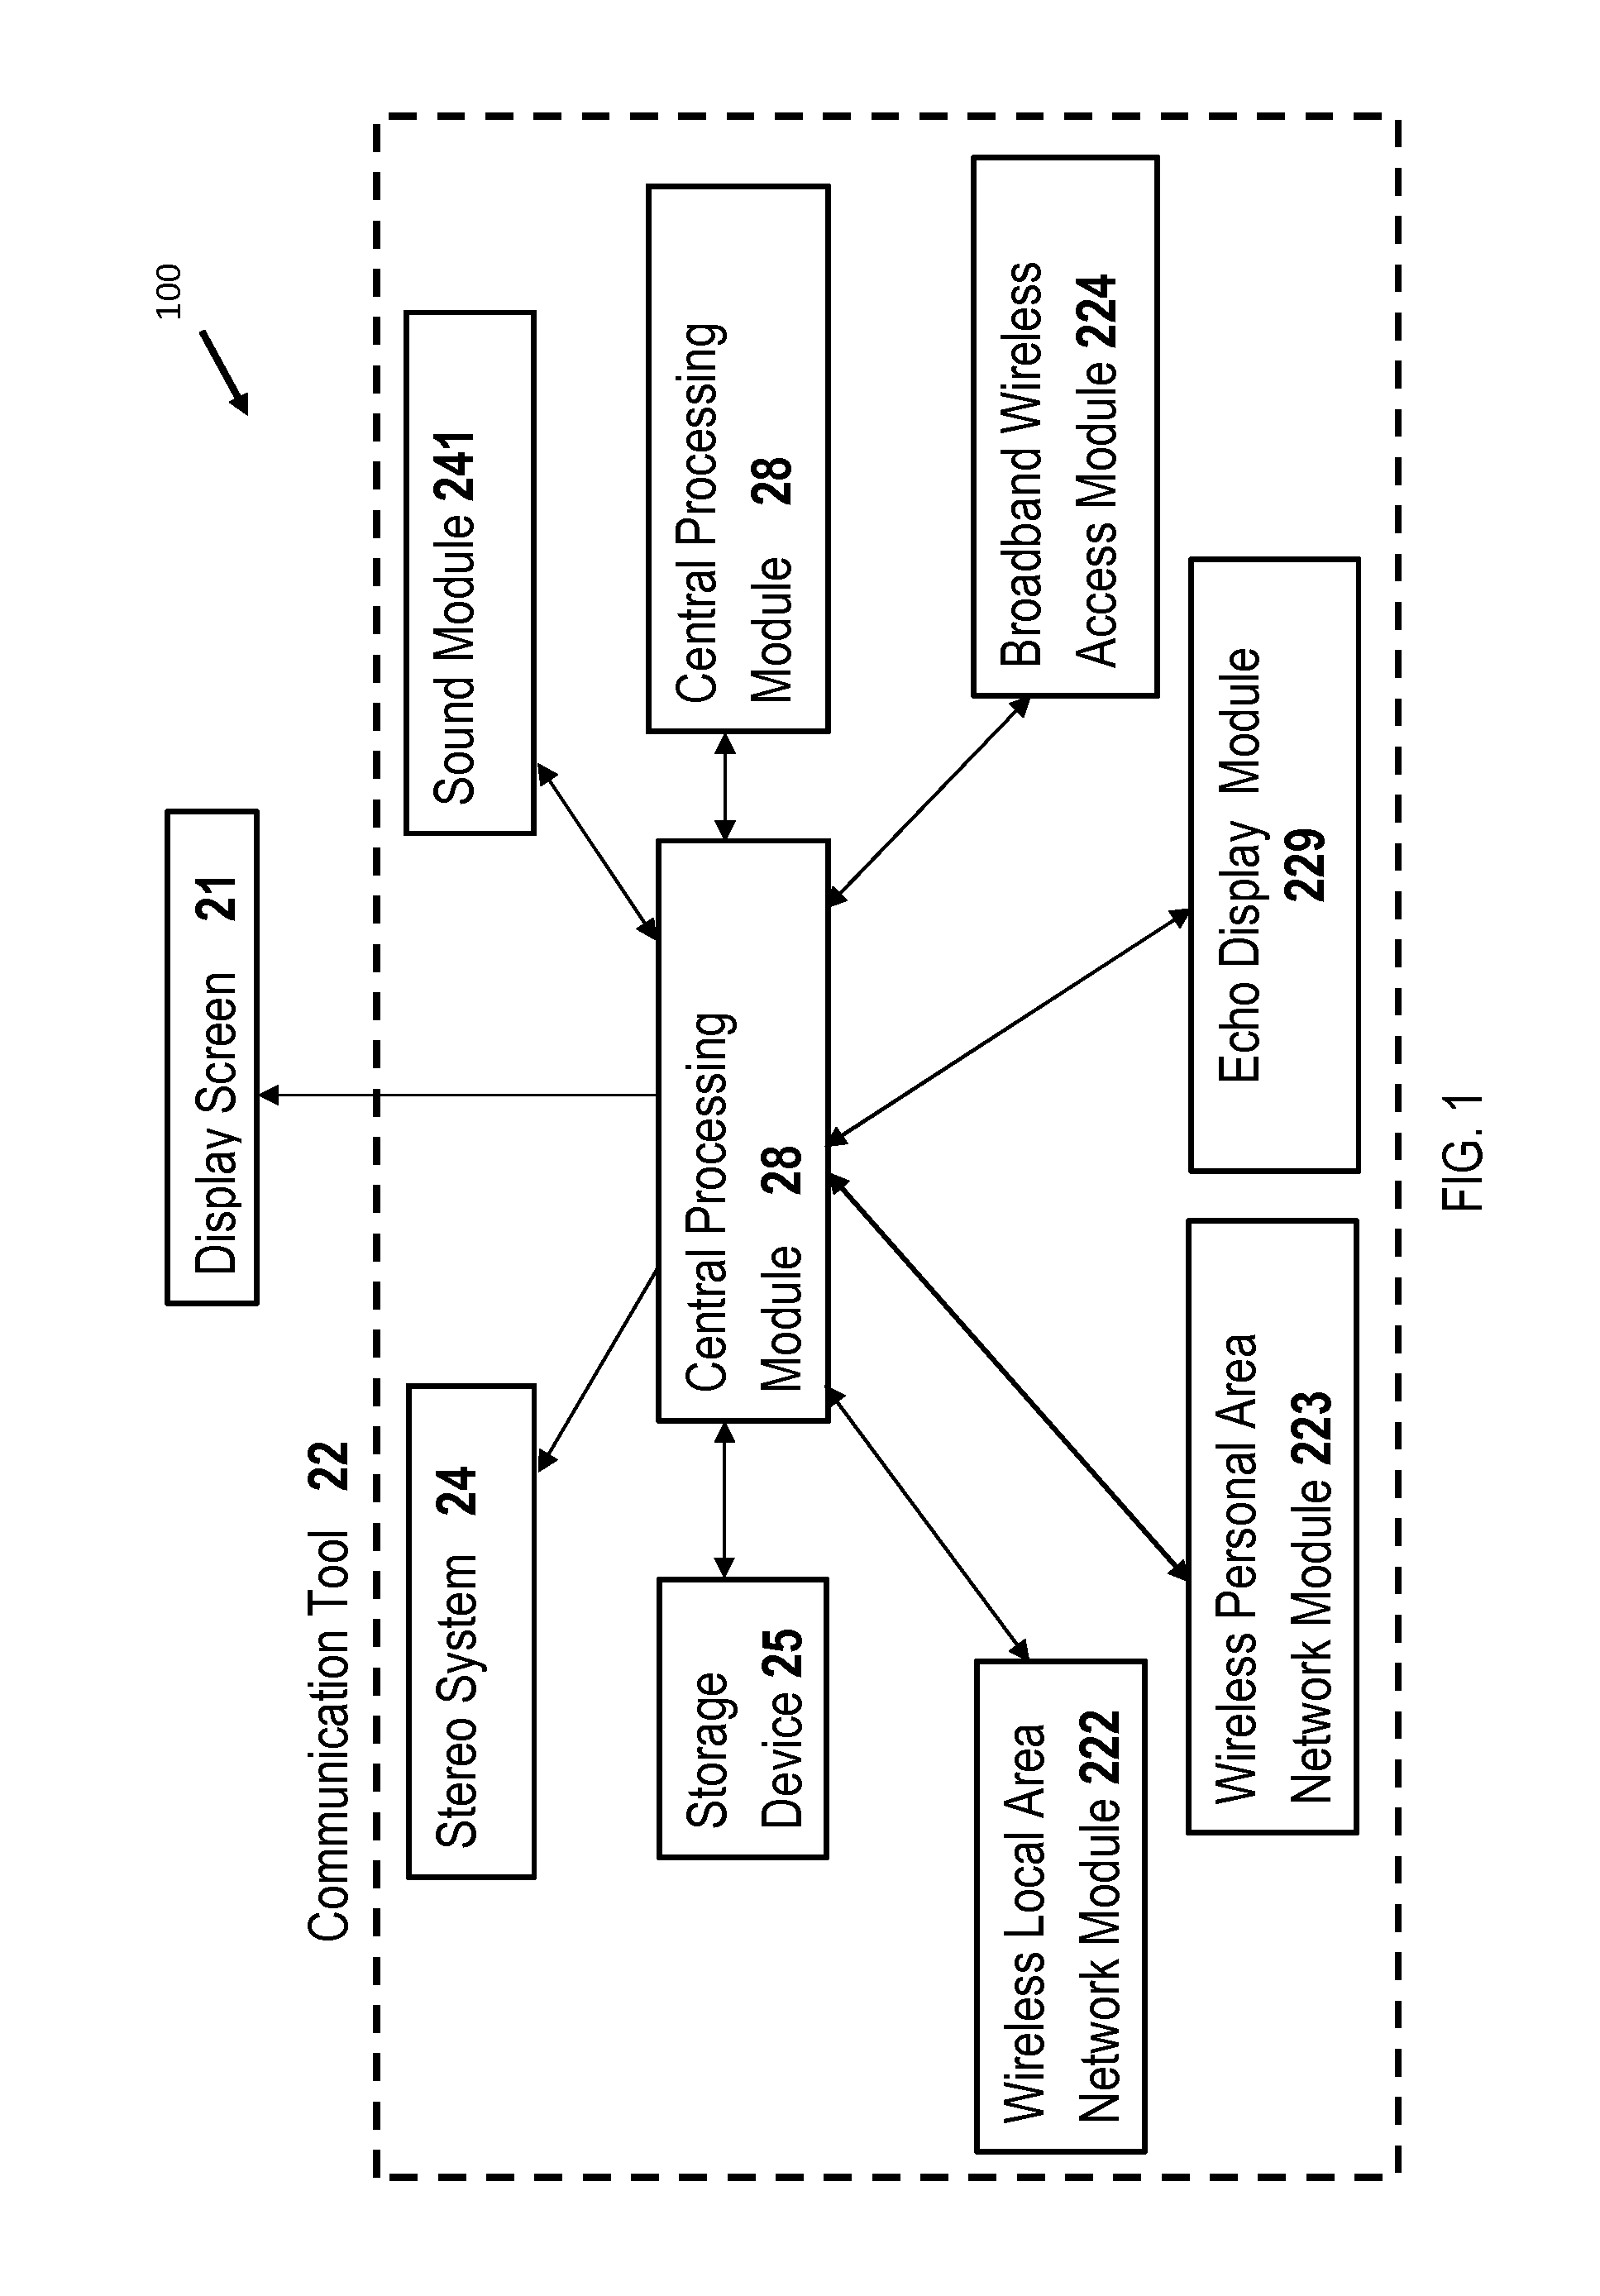 In-vehicle display for audio-video distribution